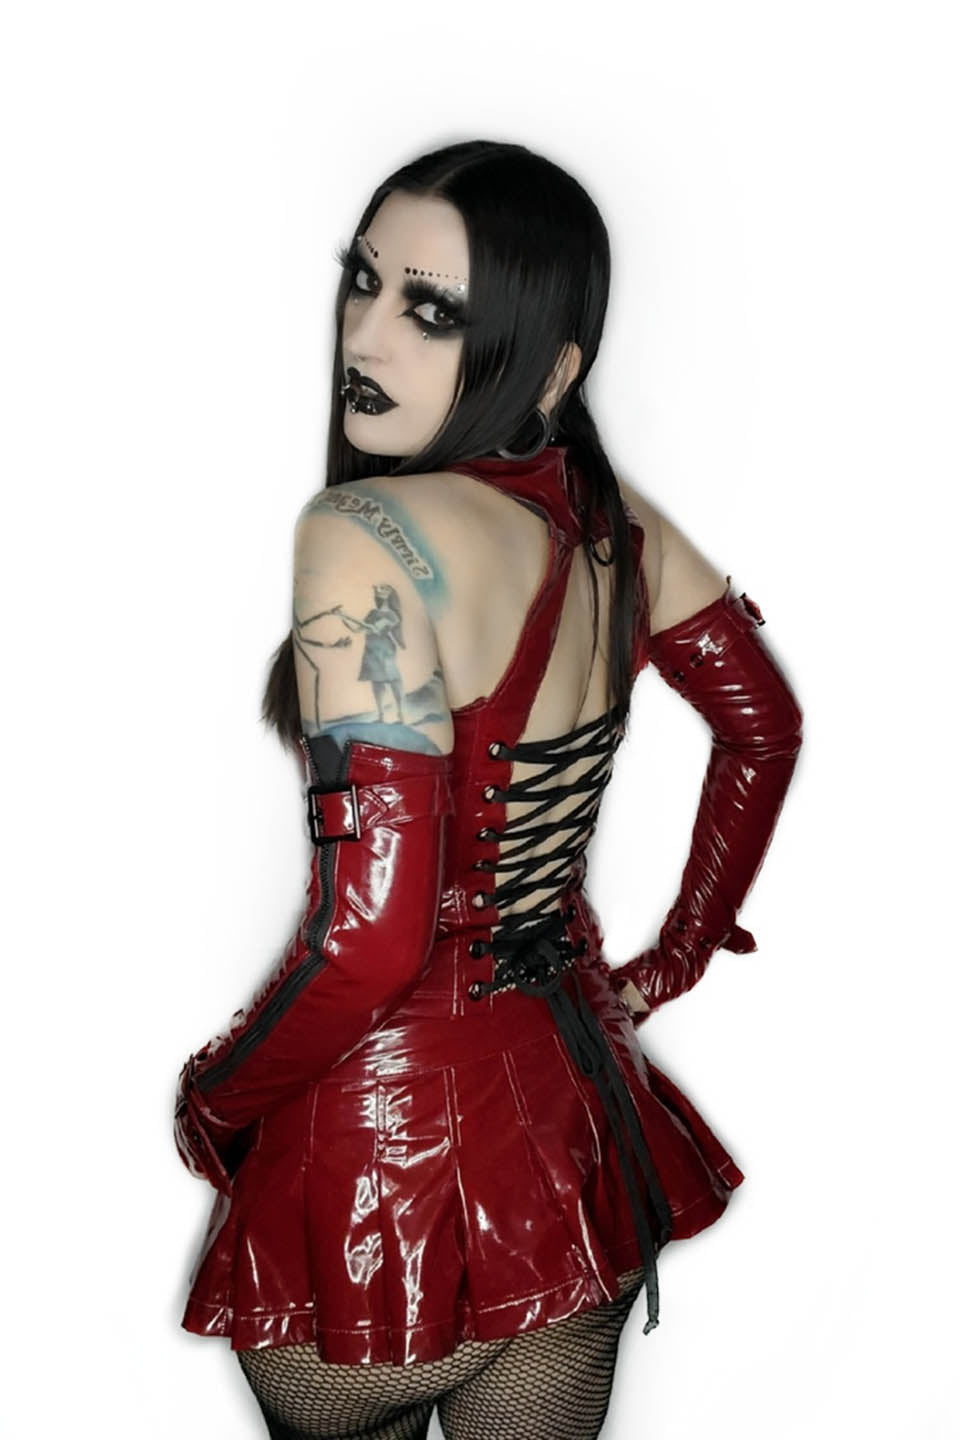 [Blood Supply]Alice Dark Gothic Corset and Lace-up Set (Black) - S / Single  Bustier: Includes Free Bra Pad.